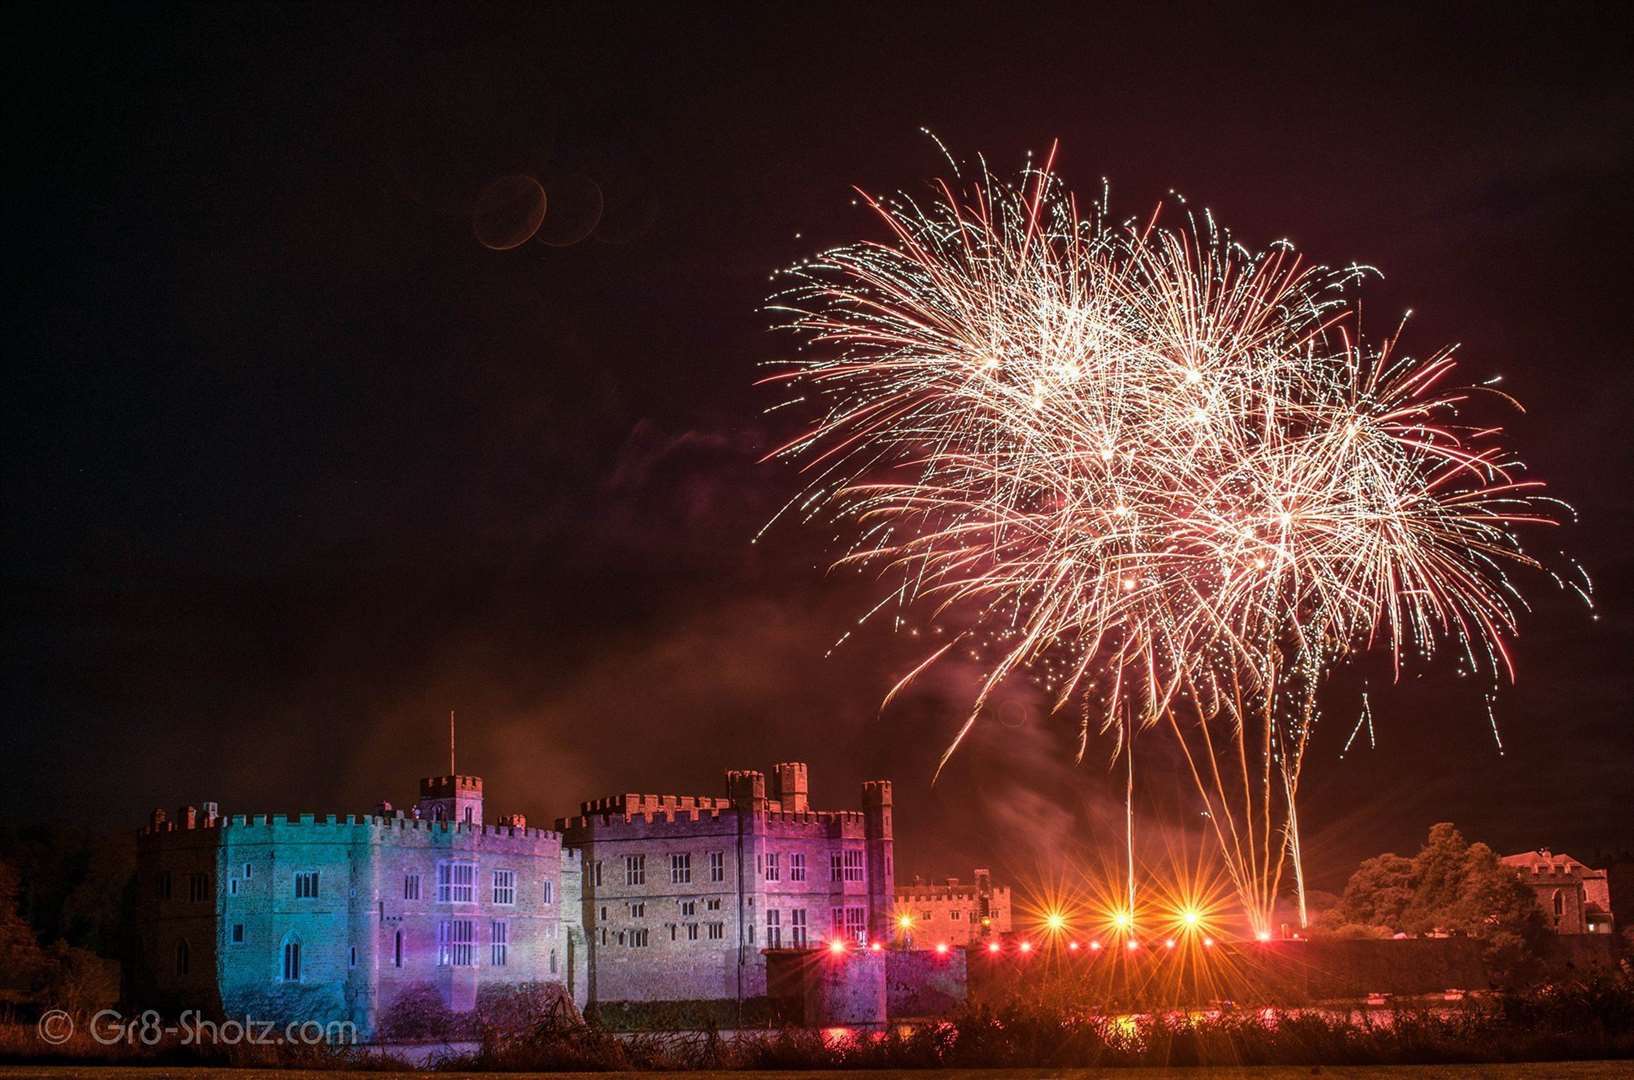 Gee Crick snapped these photos at the Leeds Castle Firework display in 2016